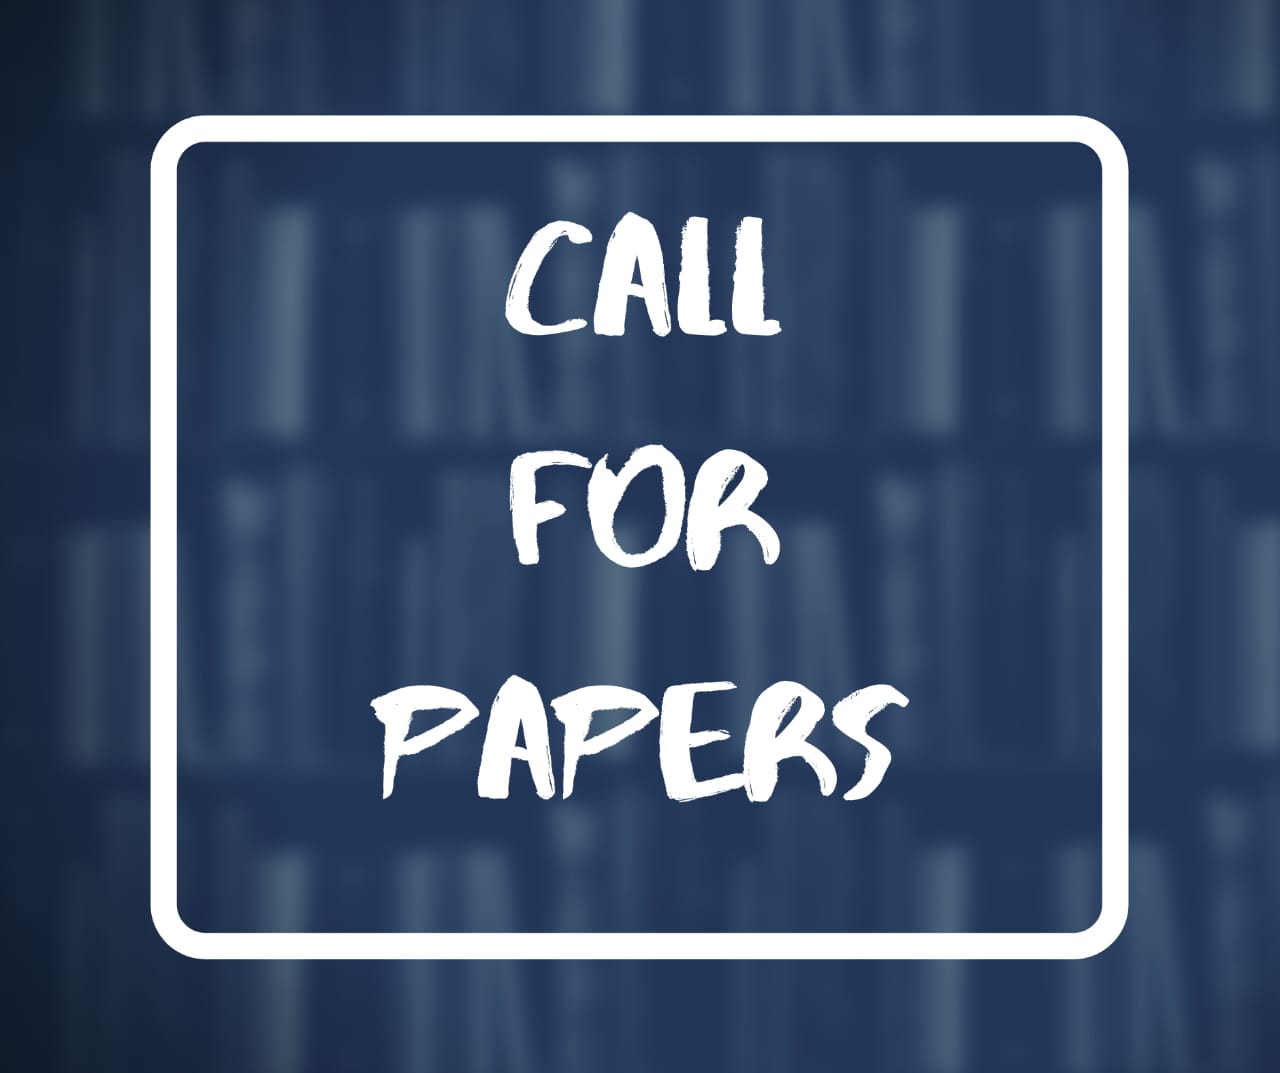 SCOPUS JOURNAL CALL FOR PAPERS! JFBM Call for Perspective Articles!